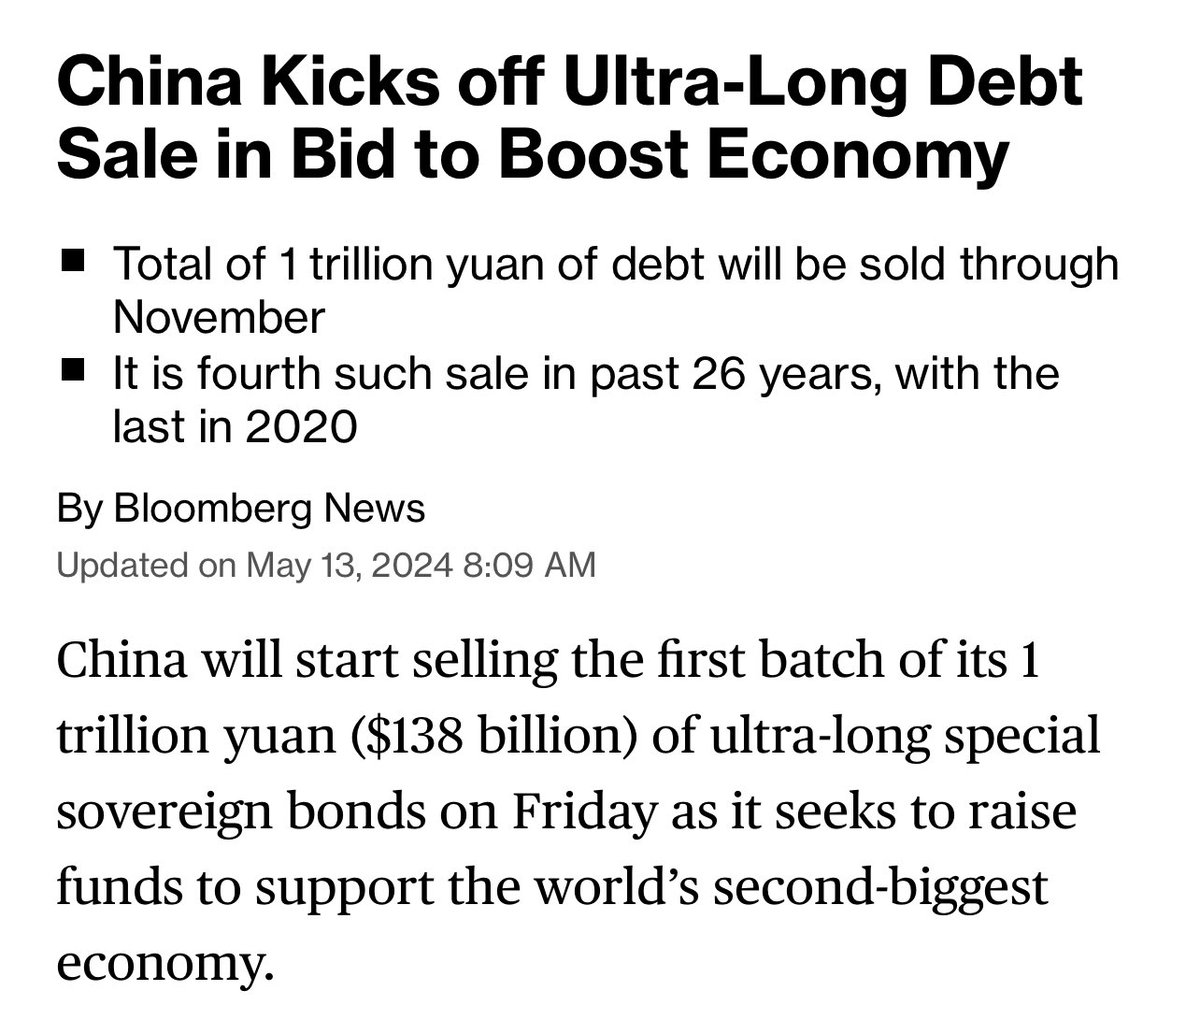 This could be the game-changer for China. We’ve been waiting for those fiscal measures to prop up the economy and this could be the start of the required boost that China needs.